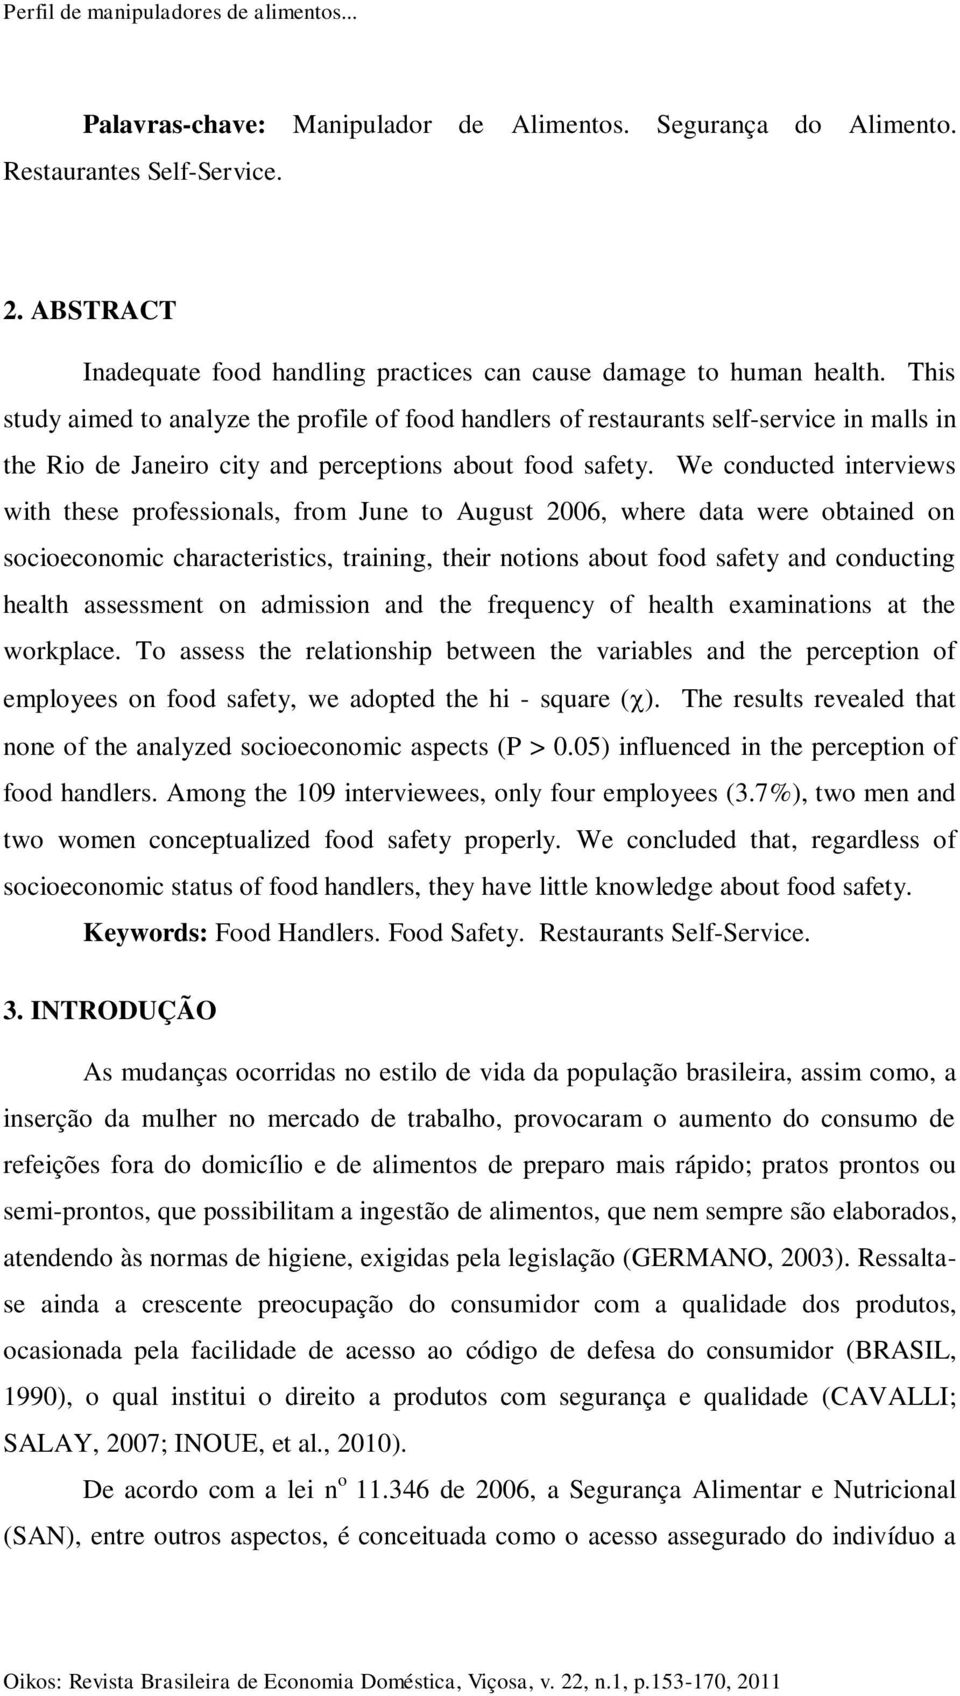 This study aimed to analyze the profile of food handlers of restaurants self-service in malls in the Rio de Janeiro city and perceptions about food safety.